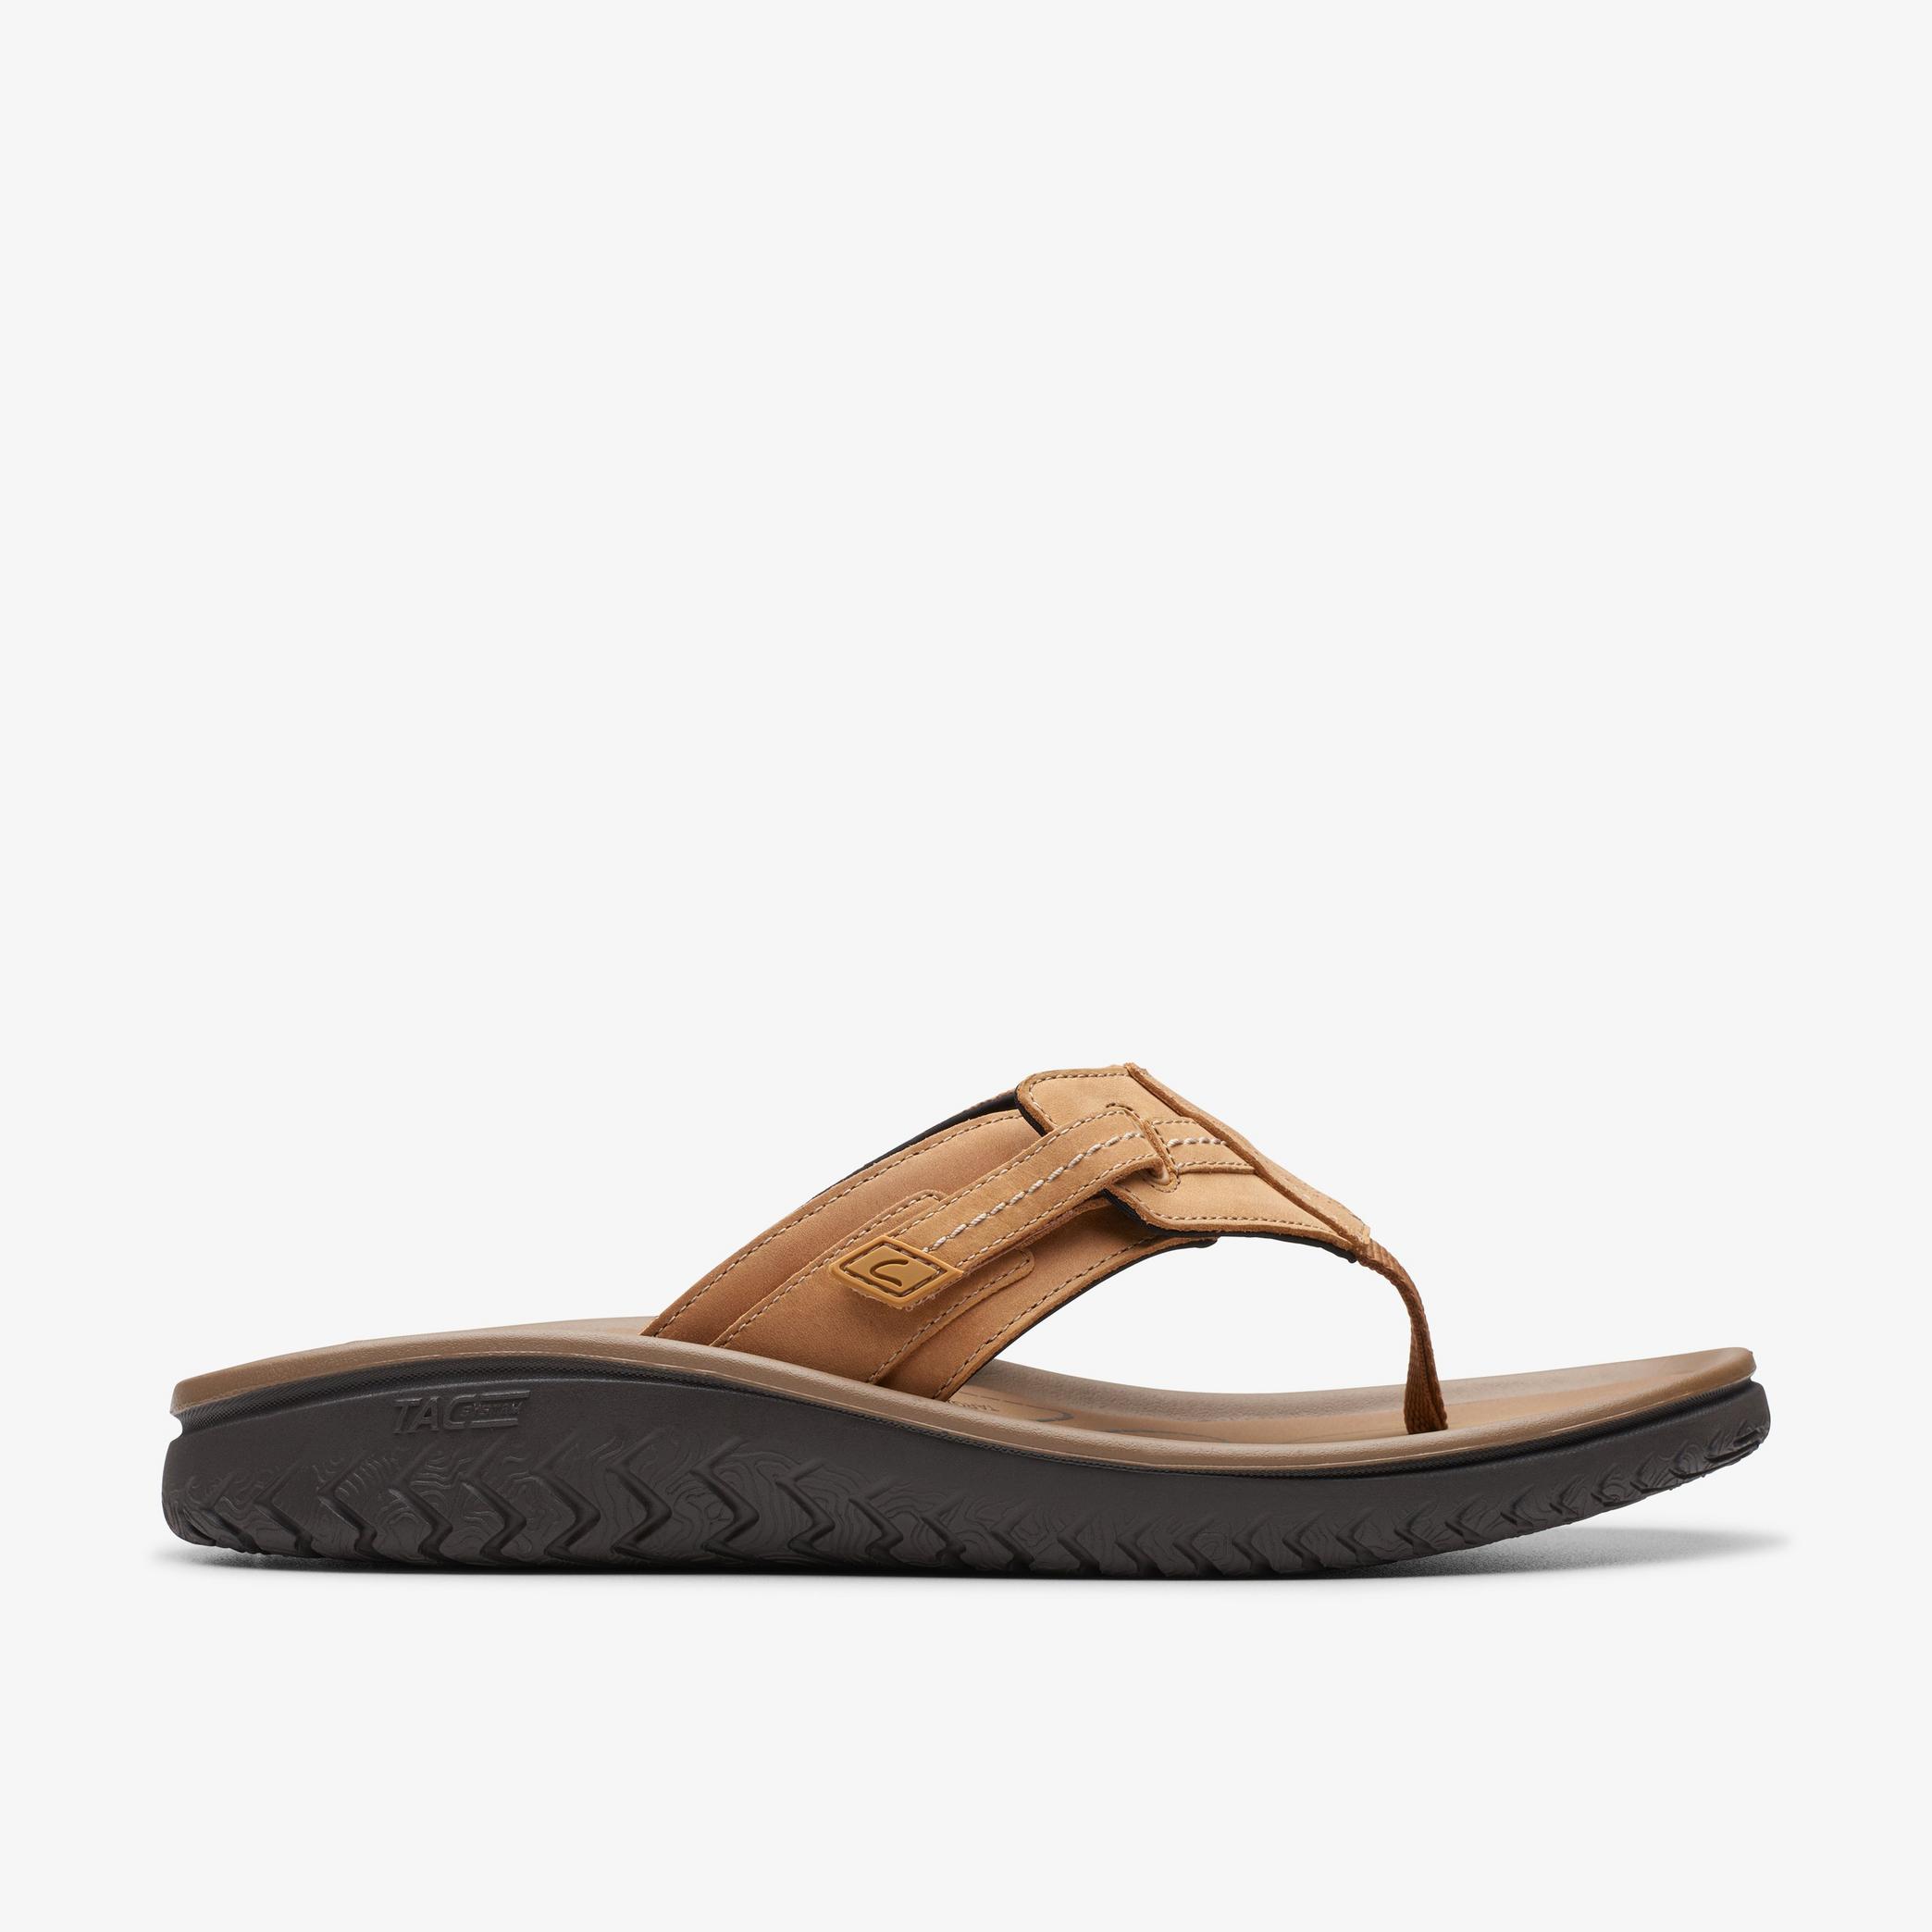 WESLEY SUN Tan Leather Flip Flop, view 1 of 6